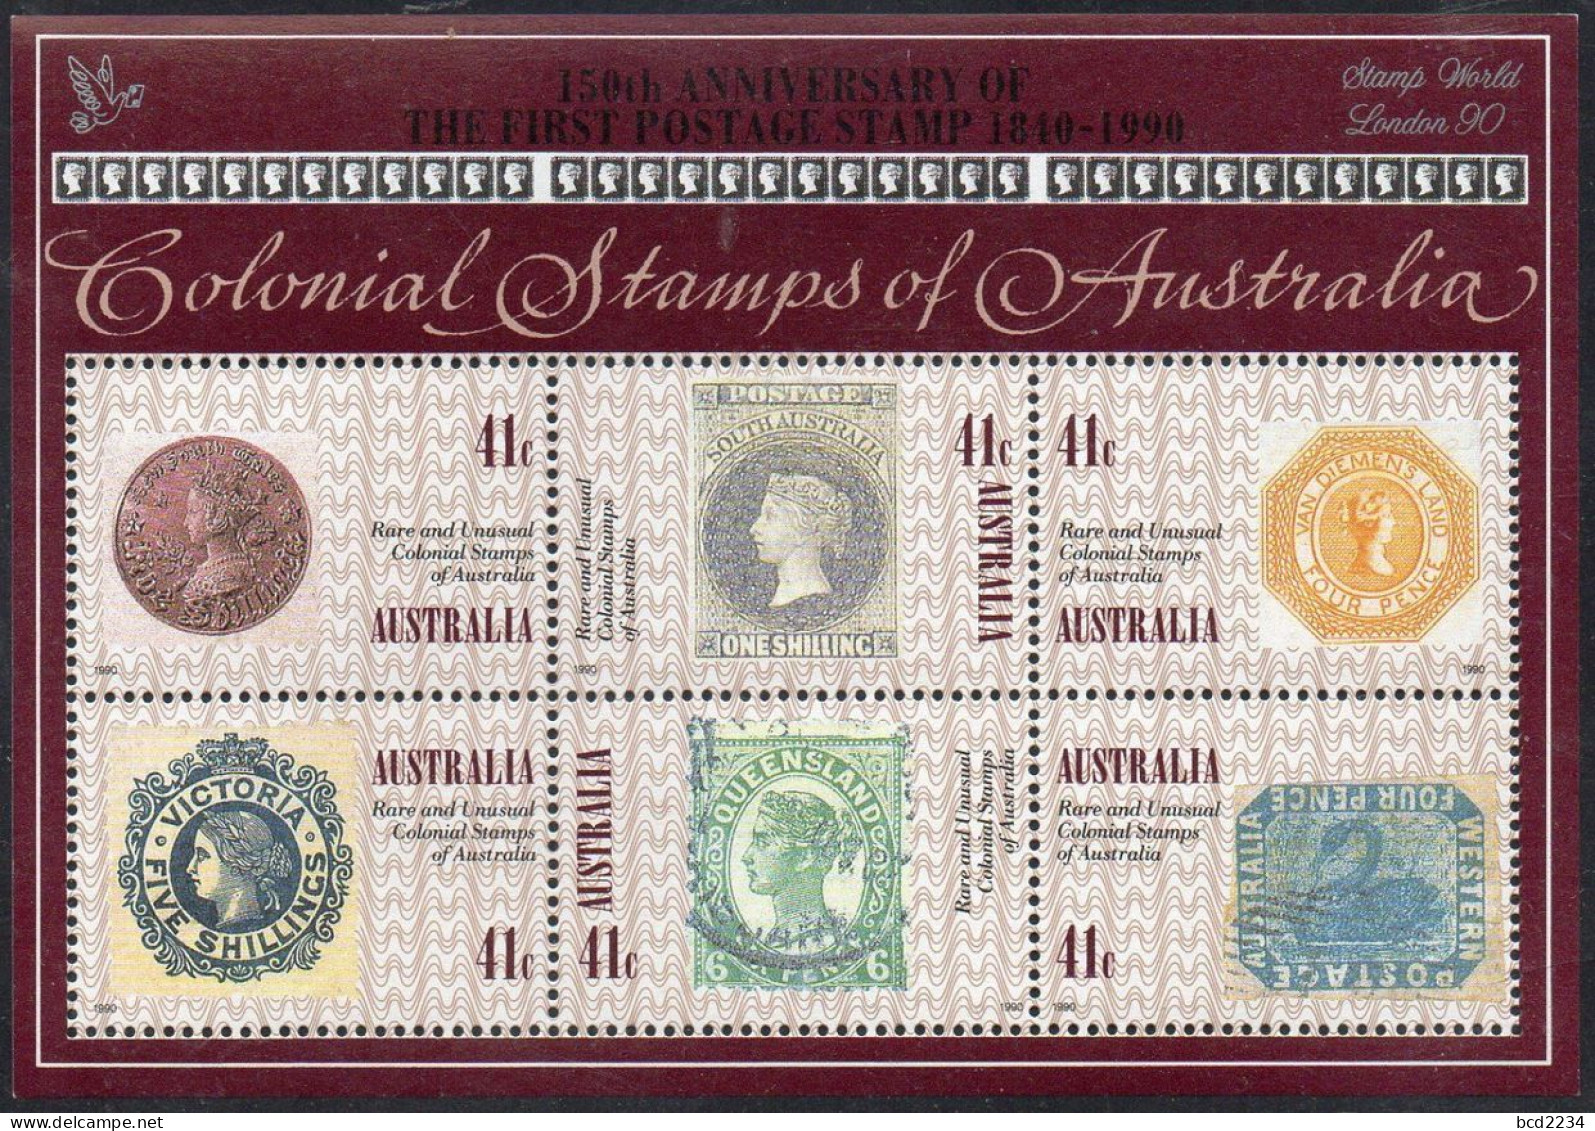 AUSTRALIA 1990 RARE & UNUSUAL COLONIAL STAMPS X5 + SILVER STAMP WORLD LONDON 90 OVERPRINT SG MS1253 Mi BL 10 MNH - Blocs - Feuillets